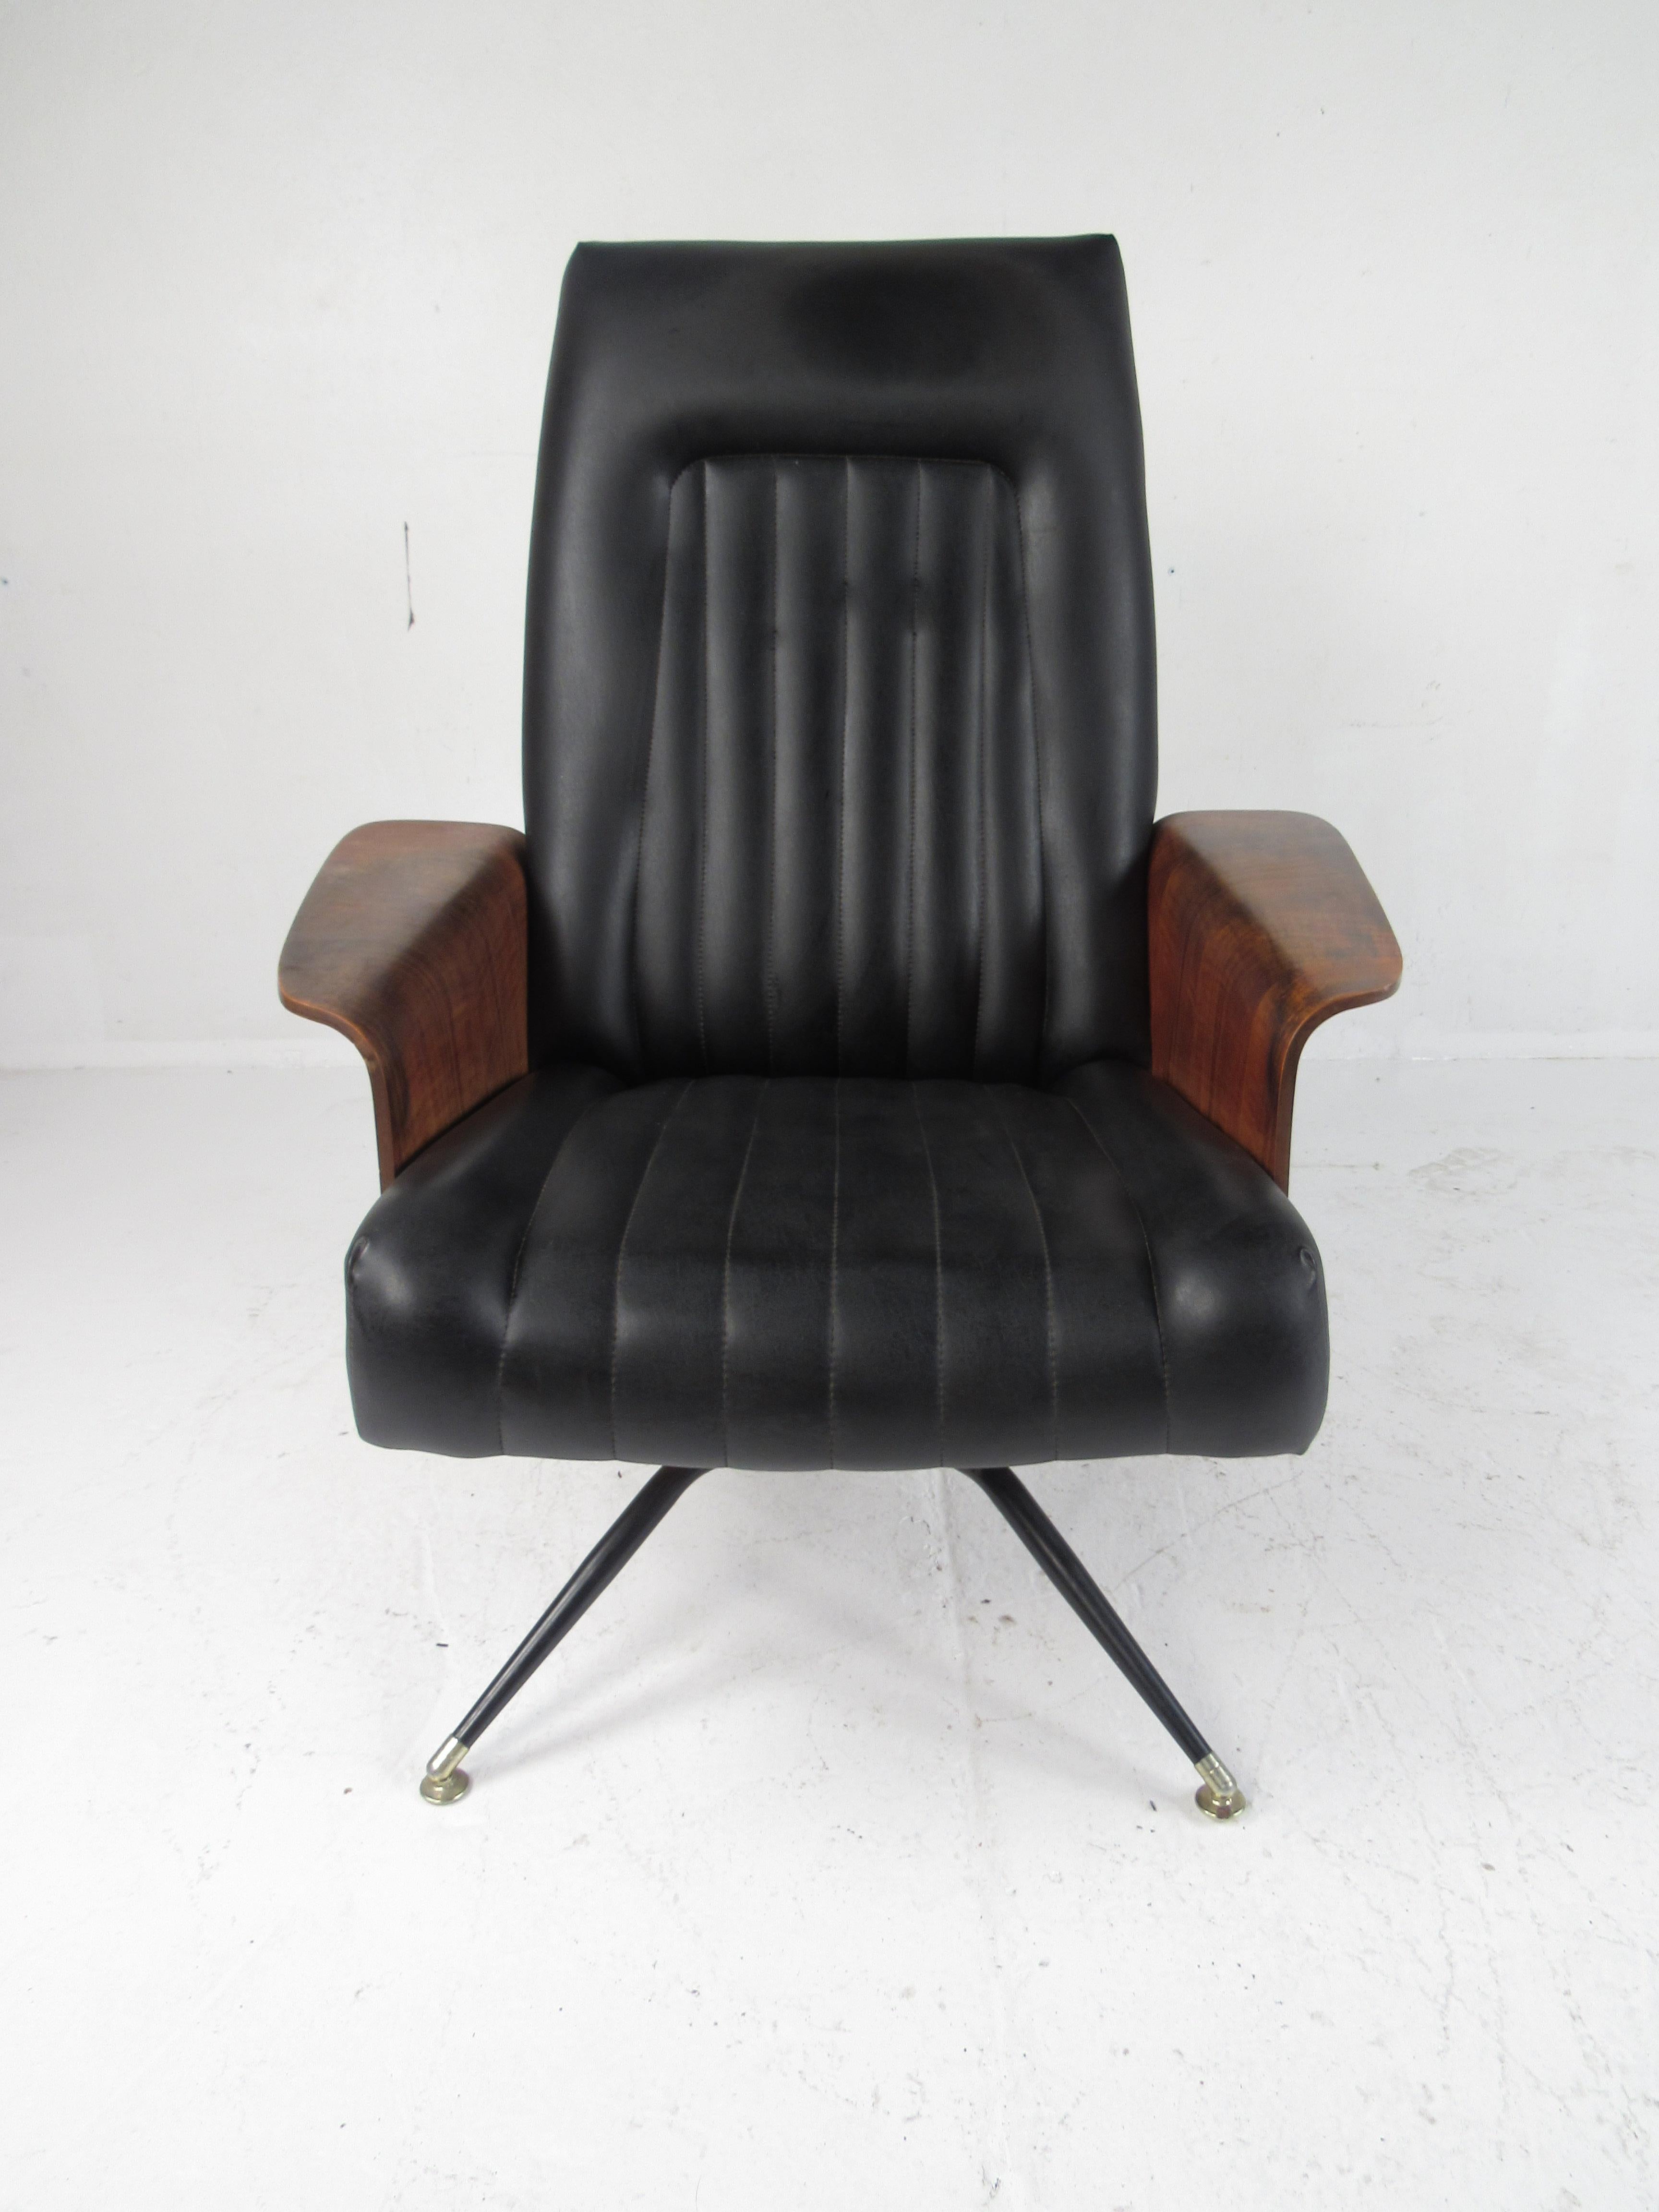 A stunning 1960s lounge chair by Murphy Miller. This gently used swivel lounge chair boasts winged walnut armrests and vinyl upholstery. A vintage gem that has an unusual swivel metal base with splayed legs. An iconic design in the style of George